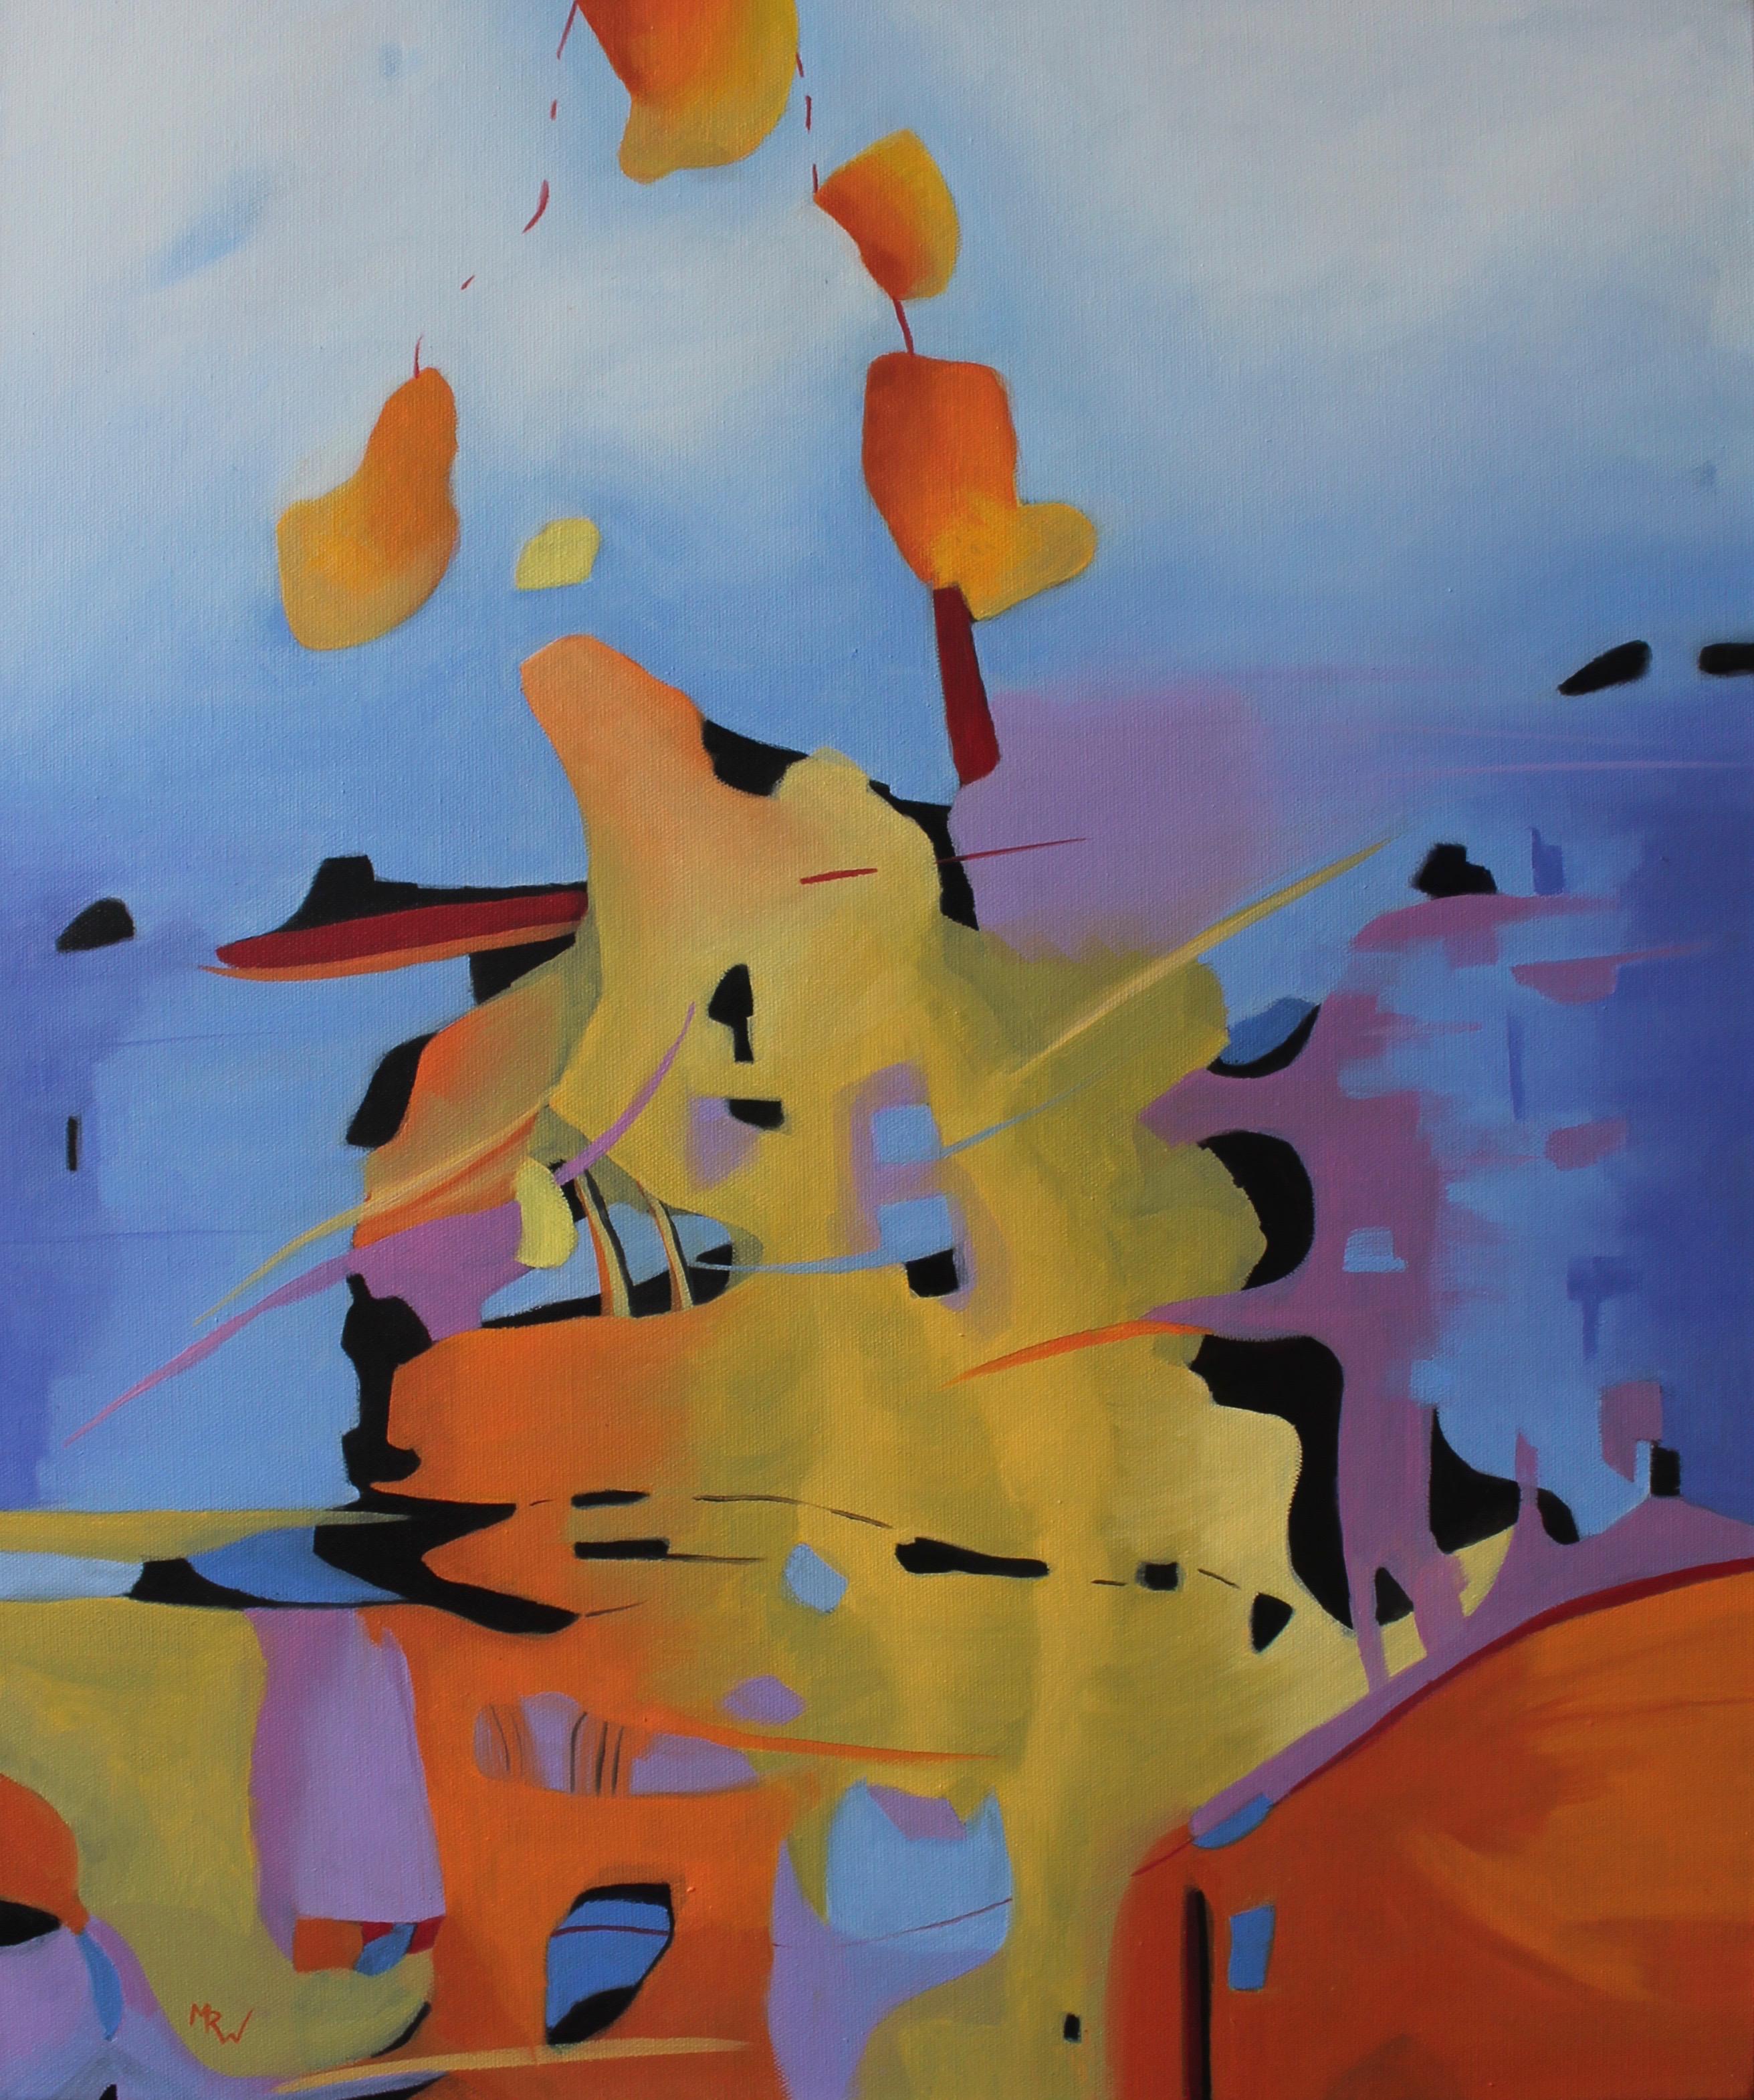 "Ultraterrena", abstract, blues, yellows, oranges, magentas, oil painting - Painting by Marcia Wise